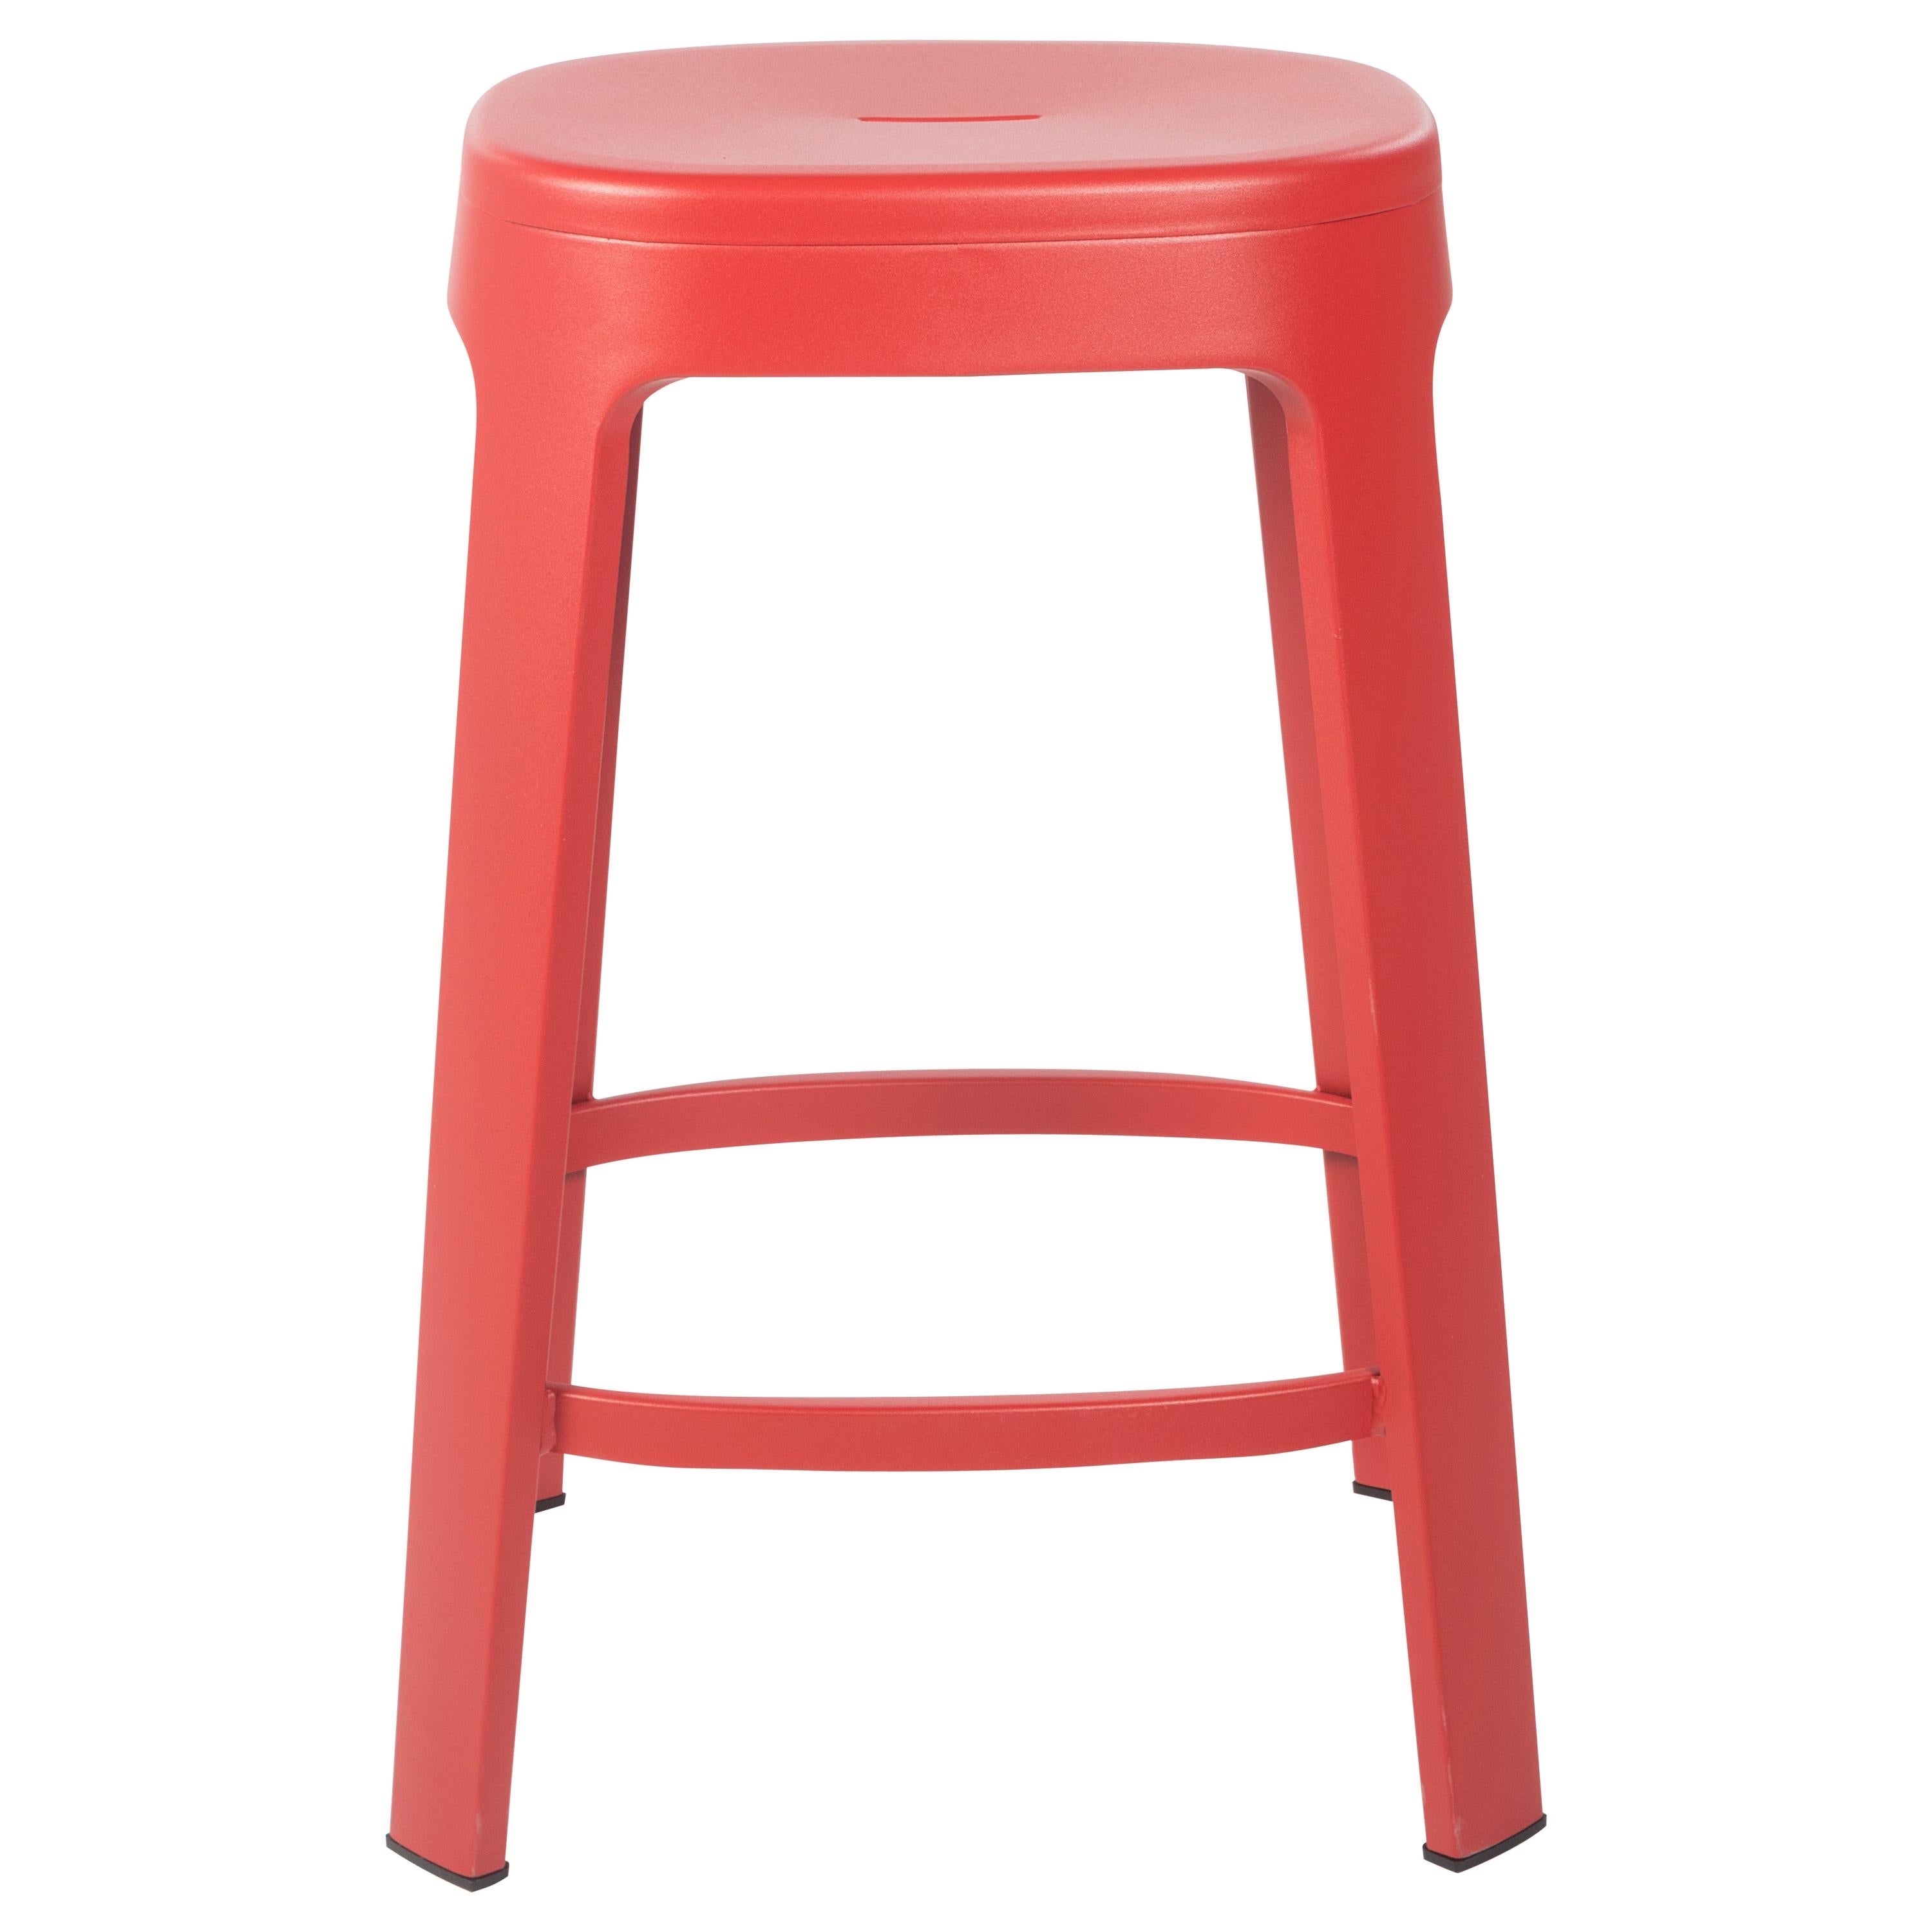 Ombra Counter Stool, Red by Emiliana Design Studio For Sale